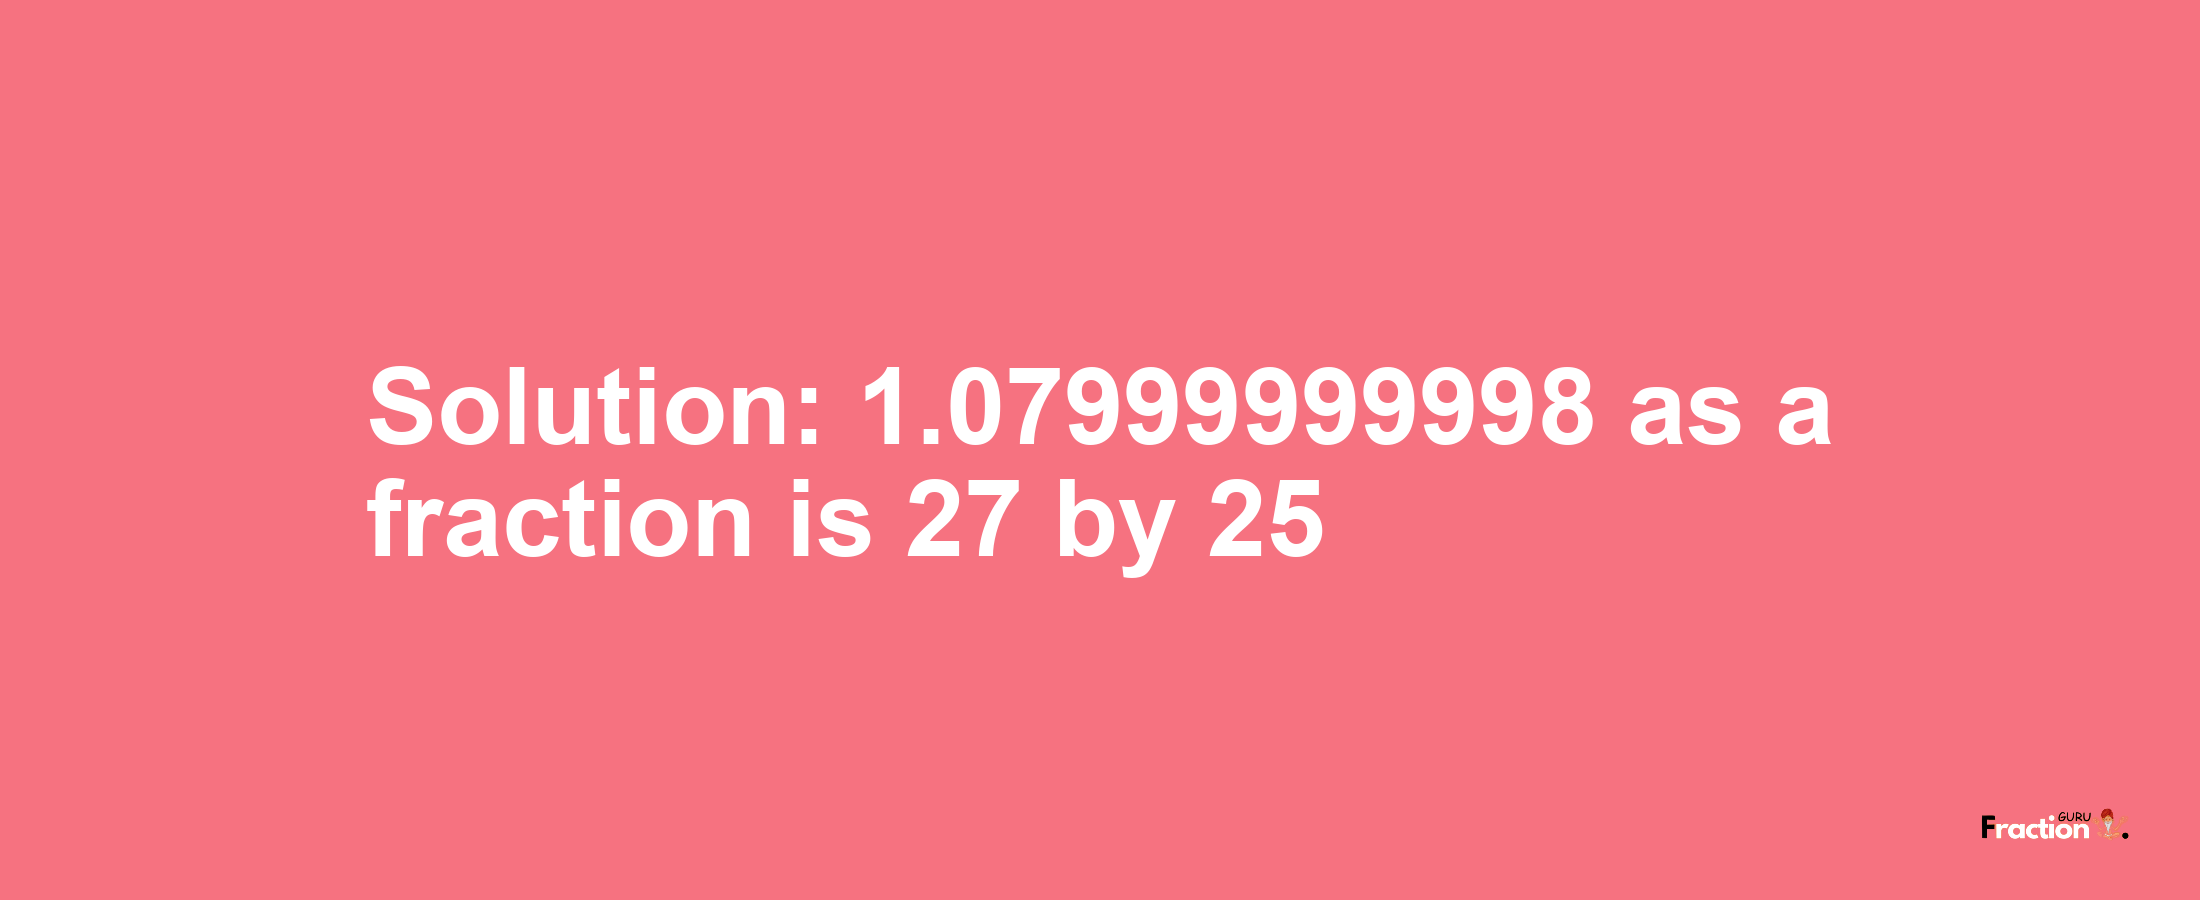 Solution:1.07999999998 as a fraction is 27/25